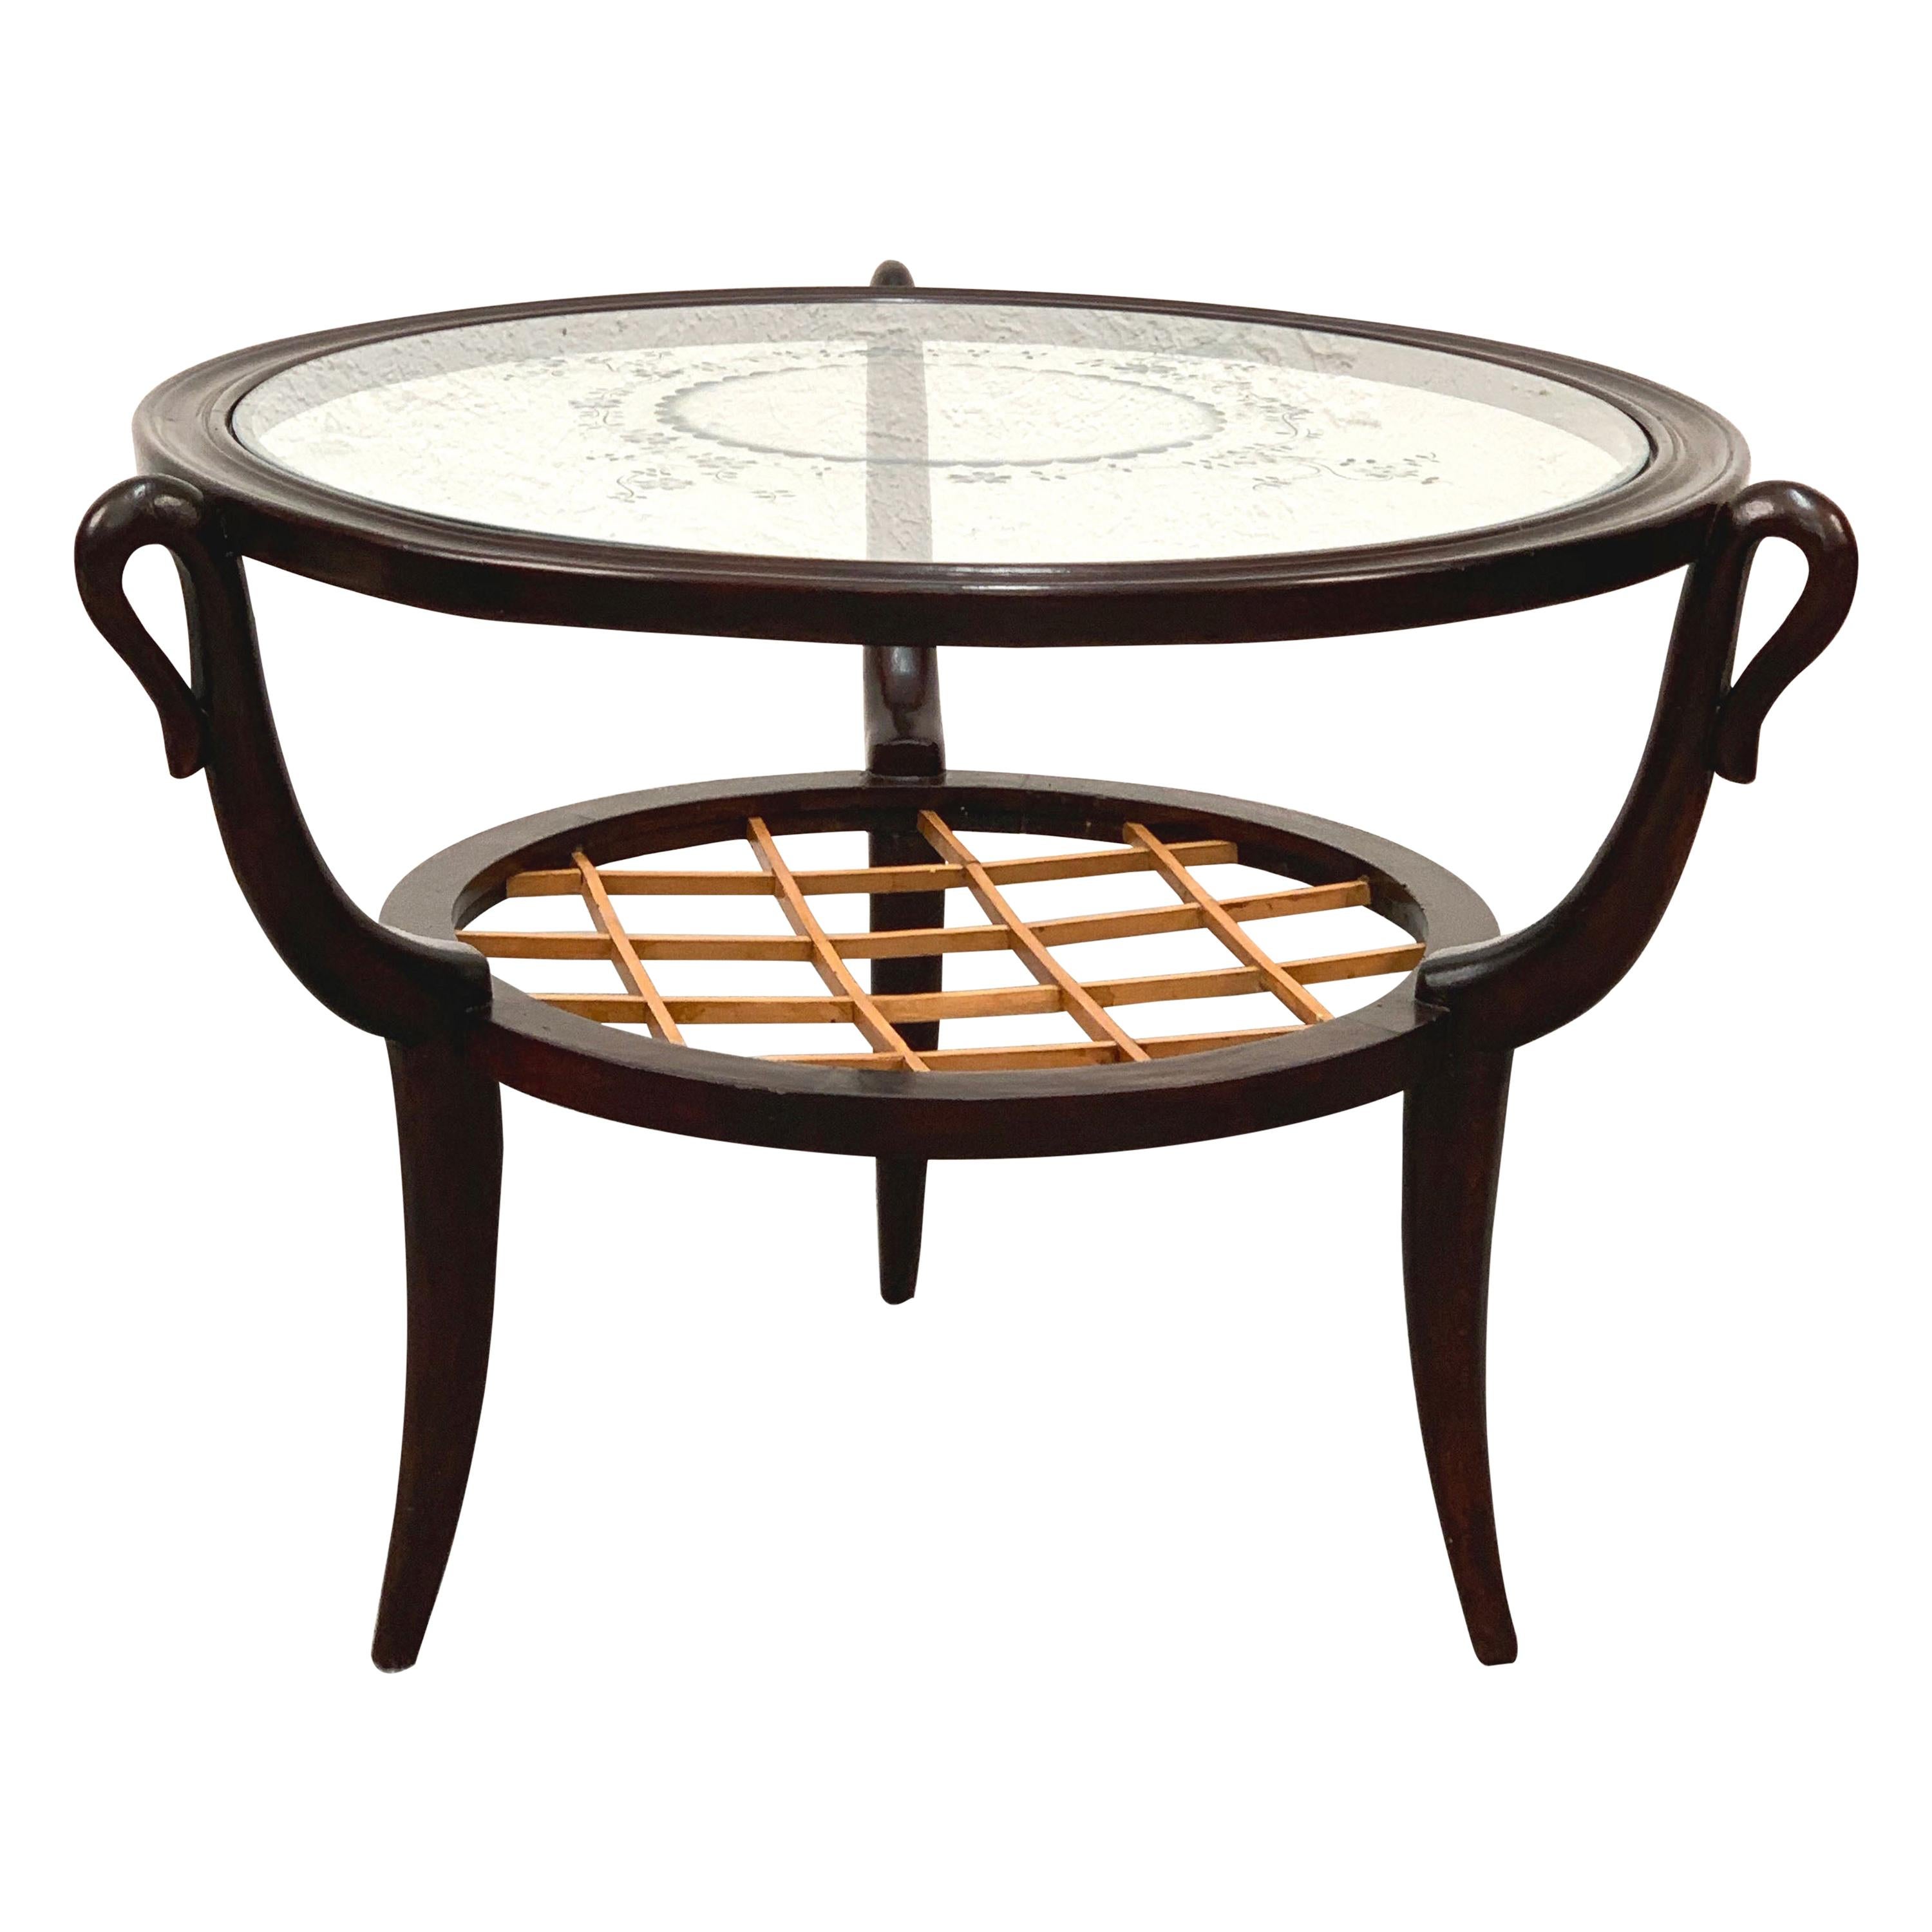 Two-level Round Wood and Glass Italian Coffee Table Gio Ponti Style, 1950s For Sale